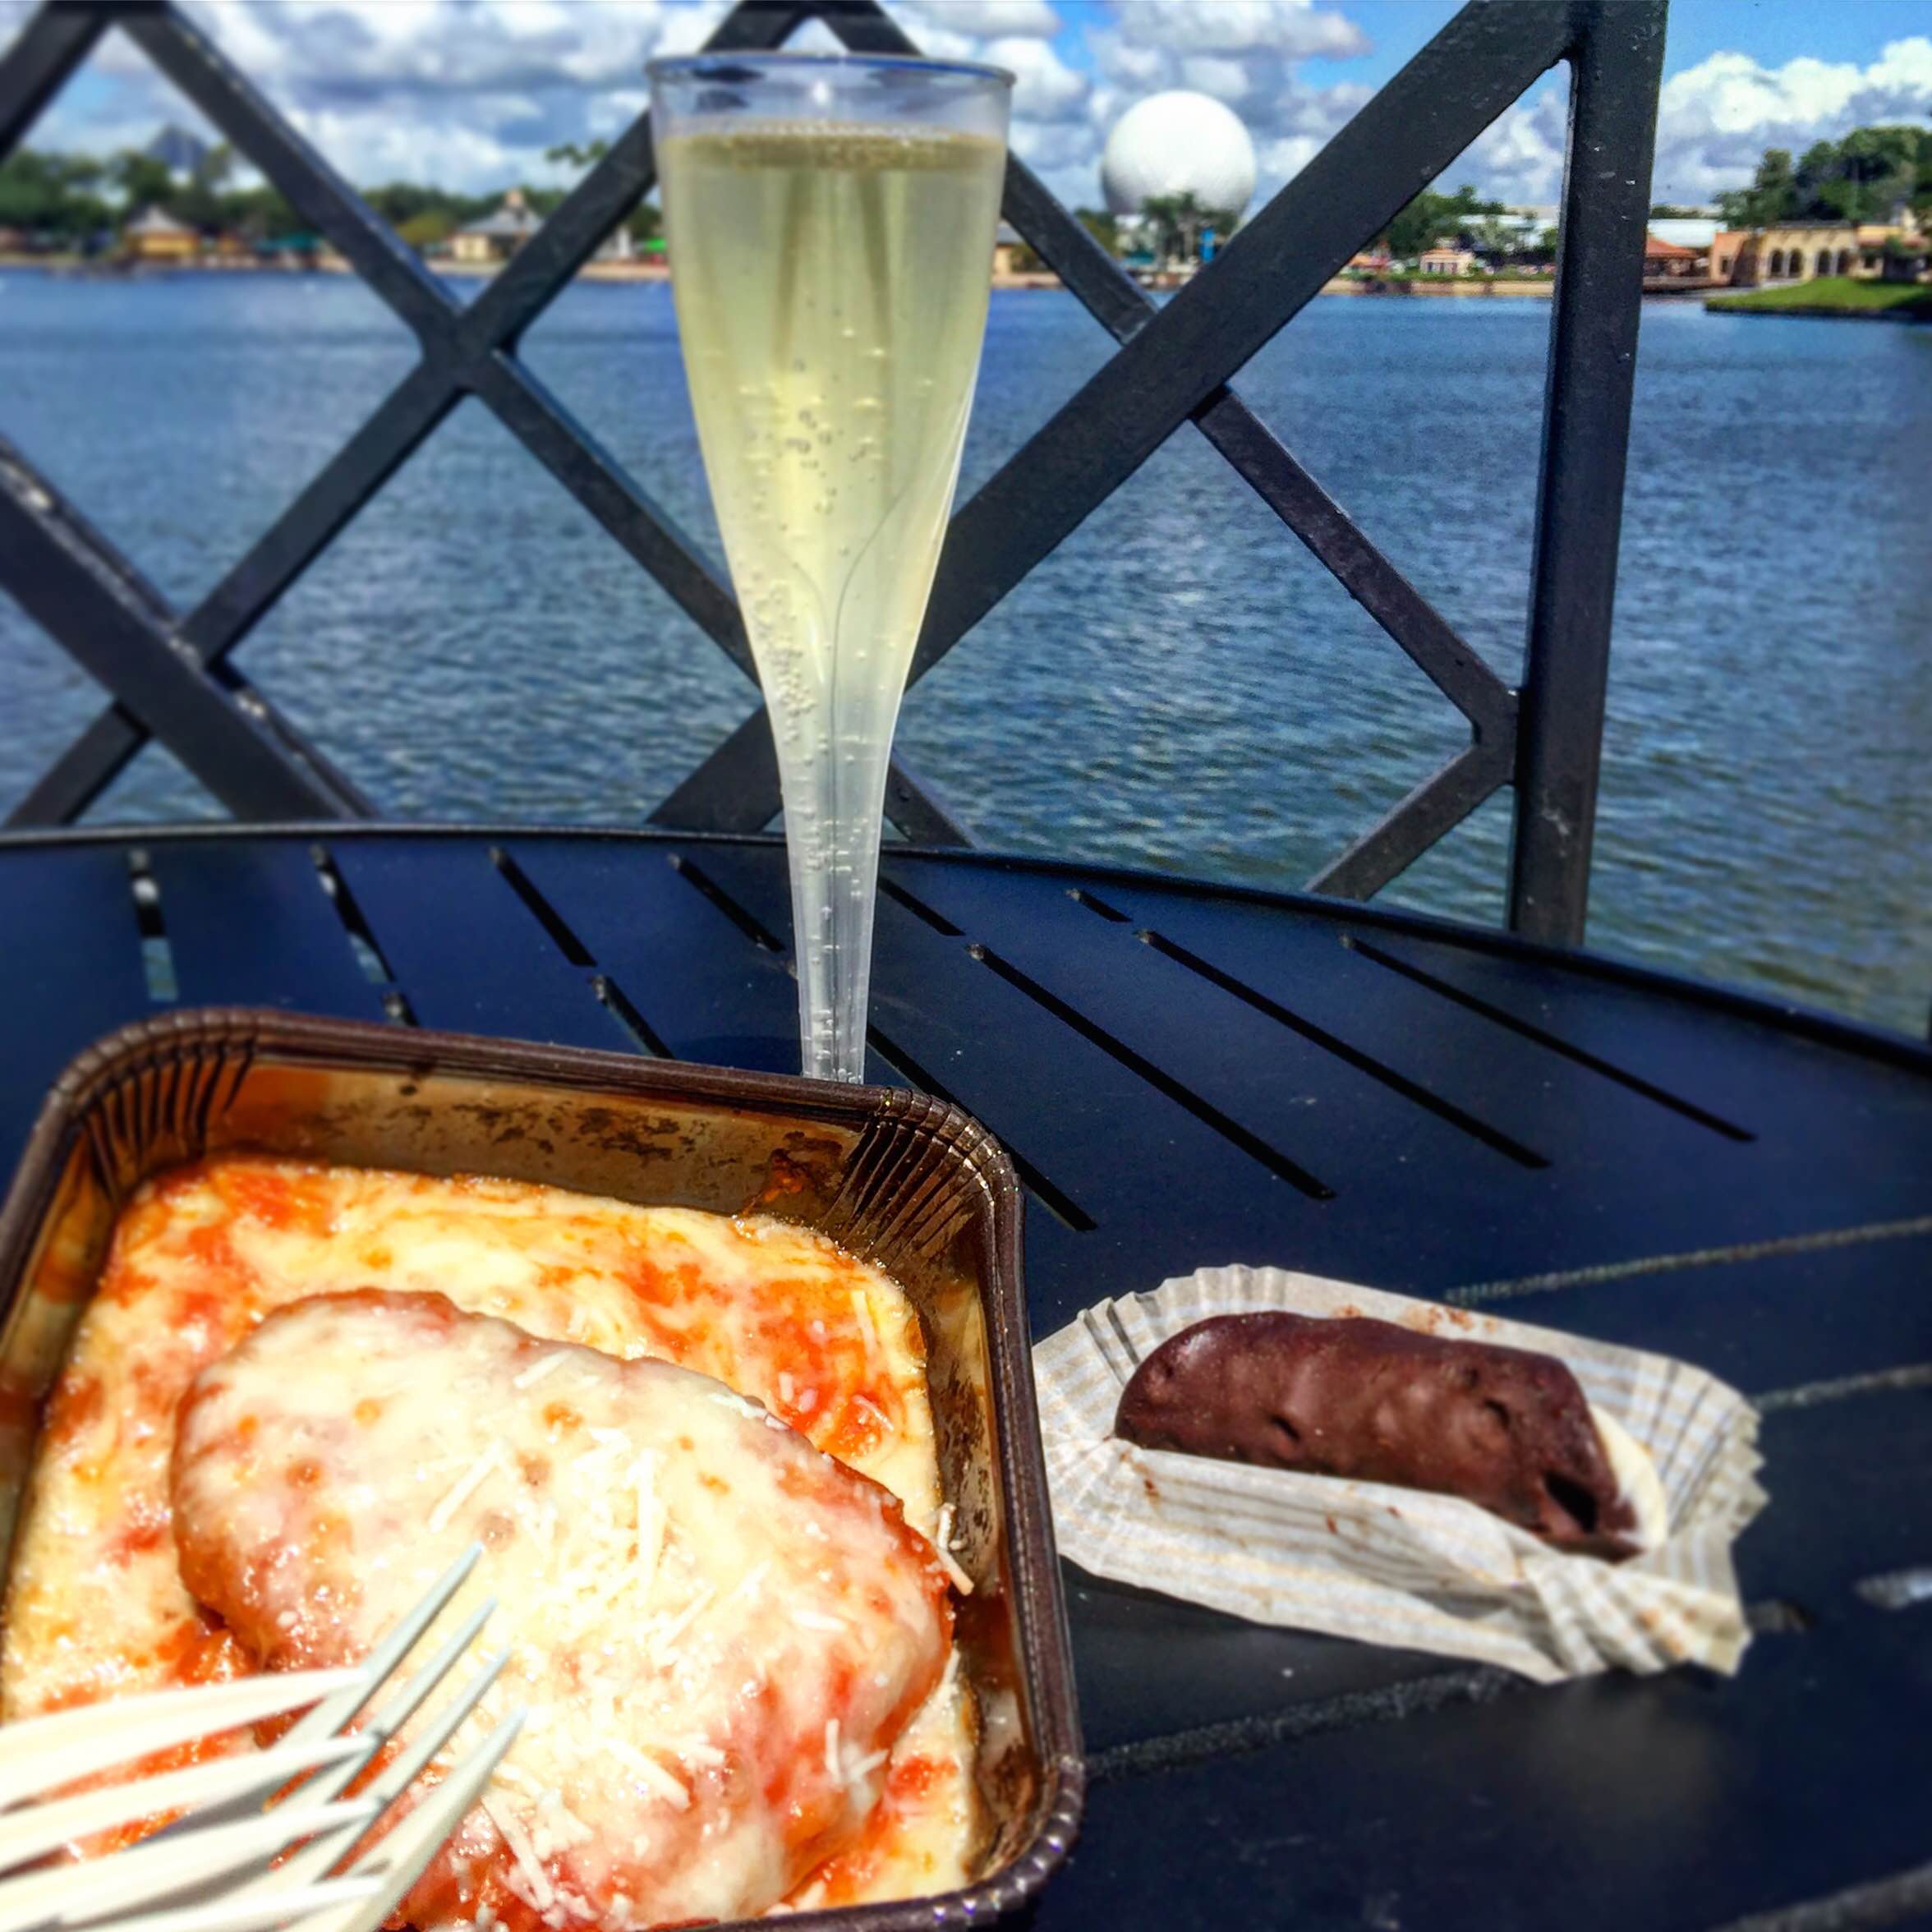 Sip and Stroll through Italy: Food and Wine Fest EXCLUSIVES Plus a Via Napoli Pizza Recipe!